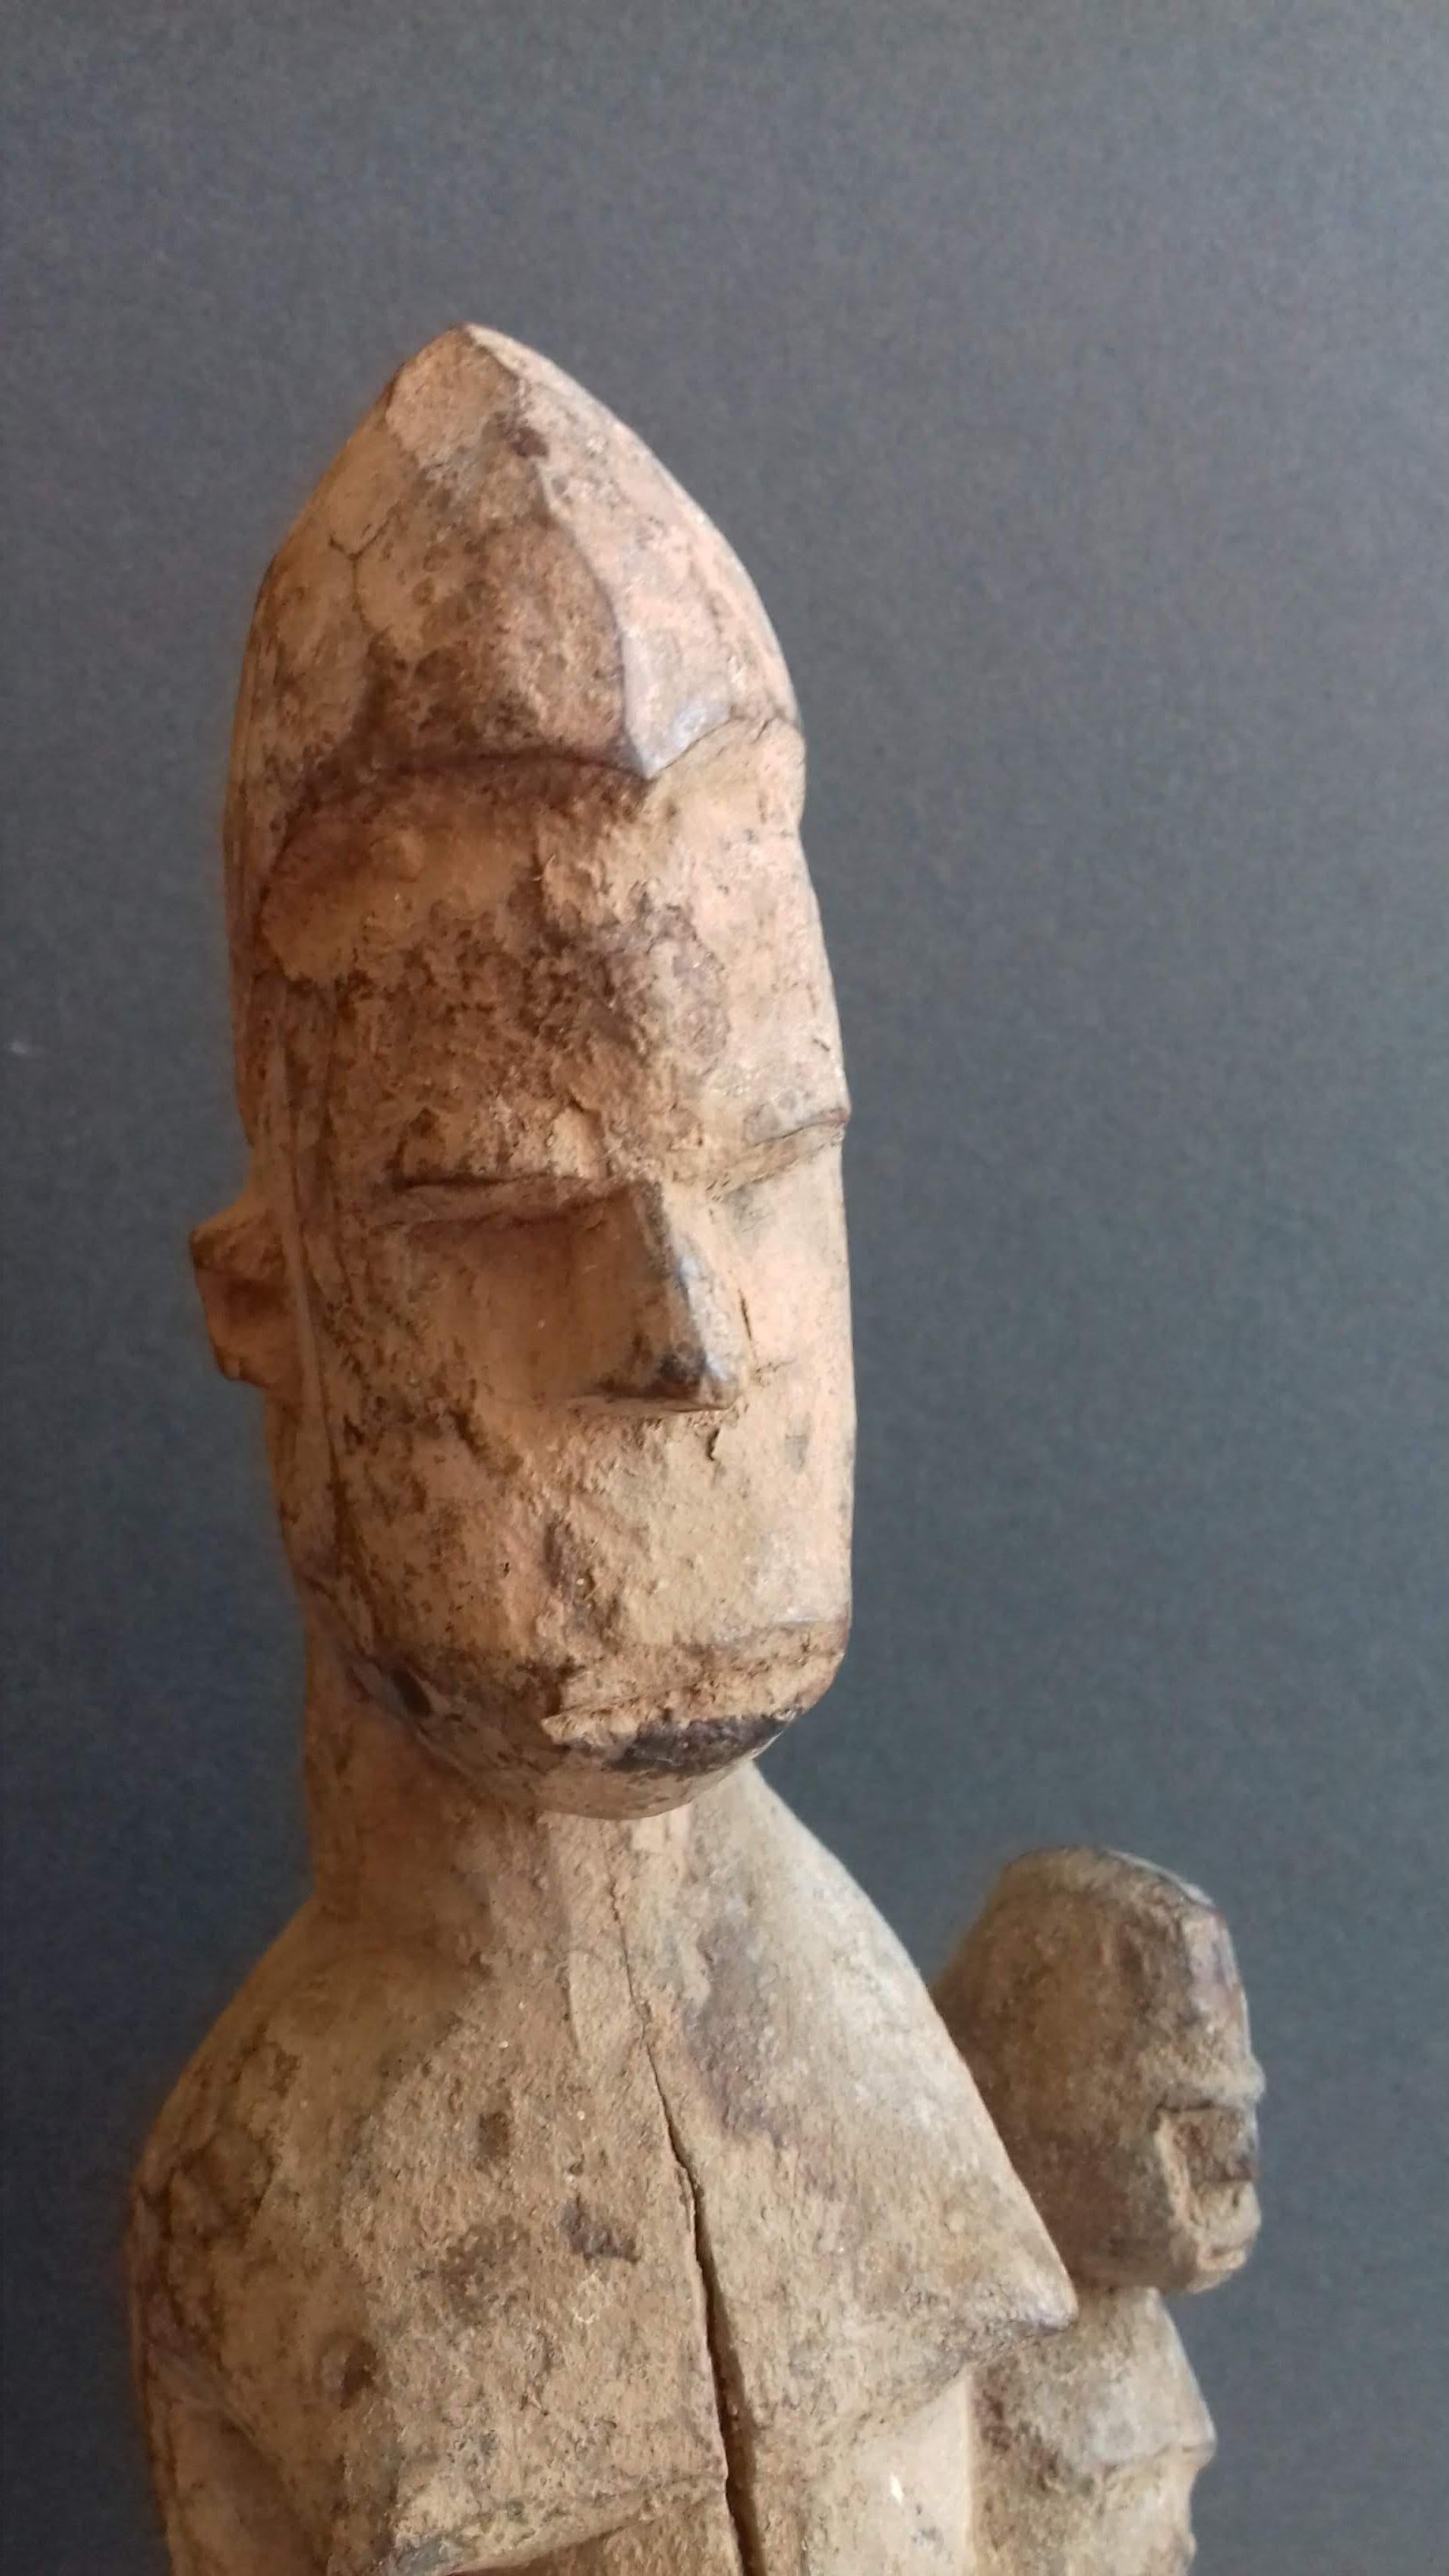 A delightful African maternity figure from the Lobi peoples of the Ivory Coast/Ghana. With a serene yet feisty expression, the mother is carrying the baby on her hip. According to Daniela Bognolo's reference work 